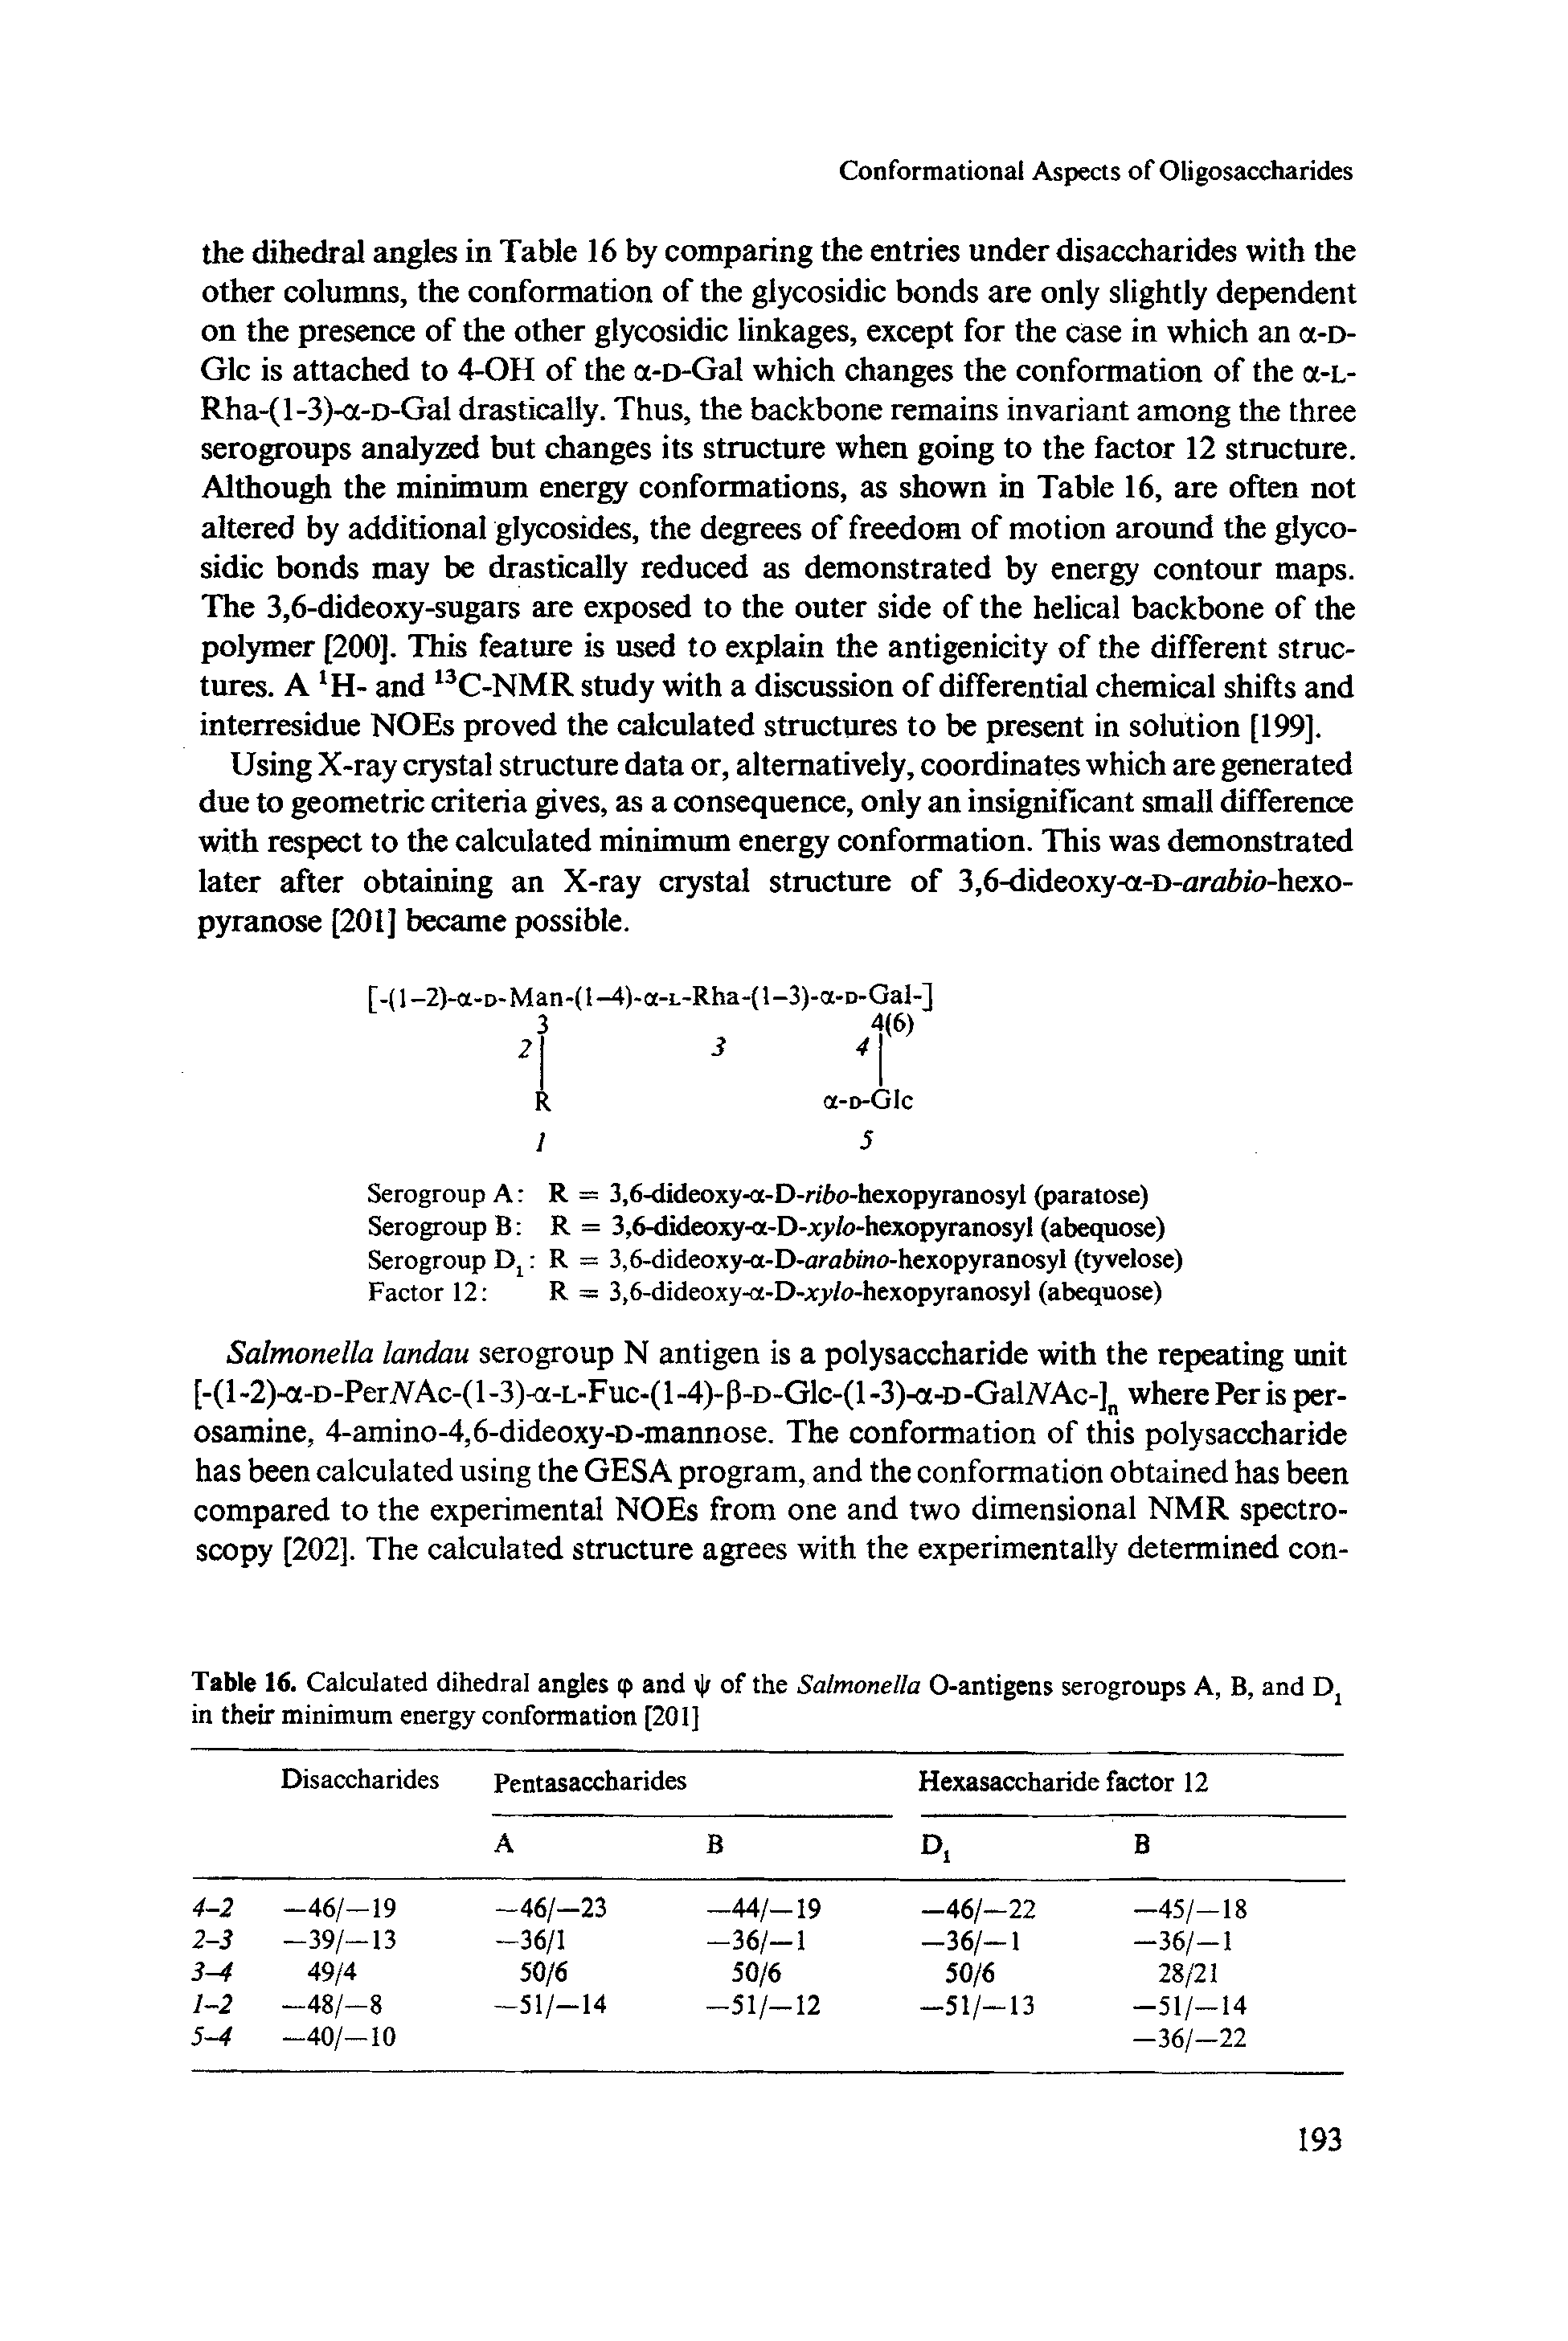 Table 16. Calculated dihedral angles cp and / of the Salmonella O-antigens serogroups A, B, and Dx in their minimum energy conformation [201]...